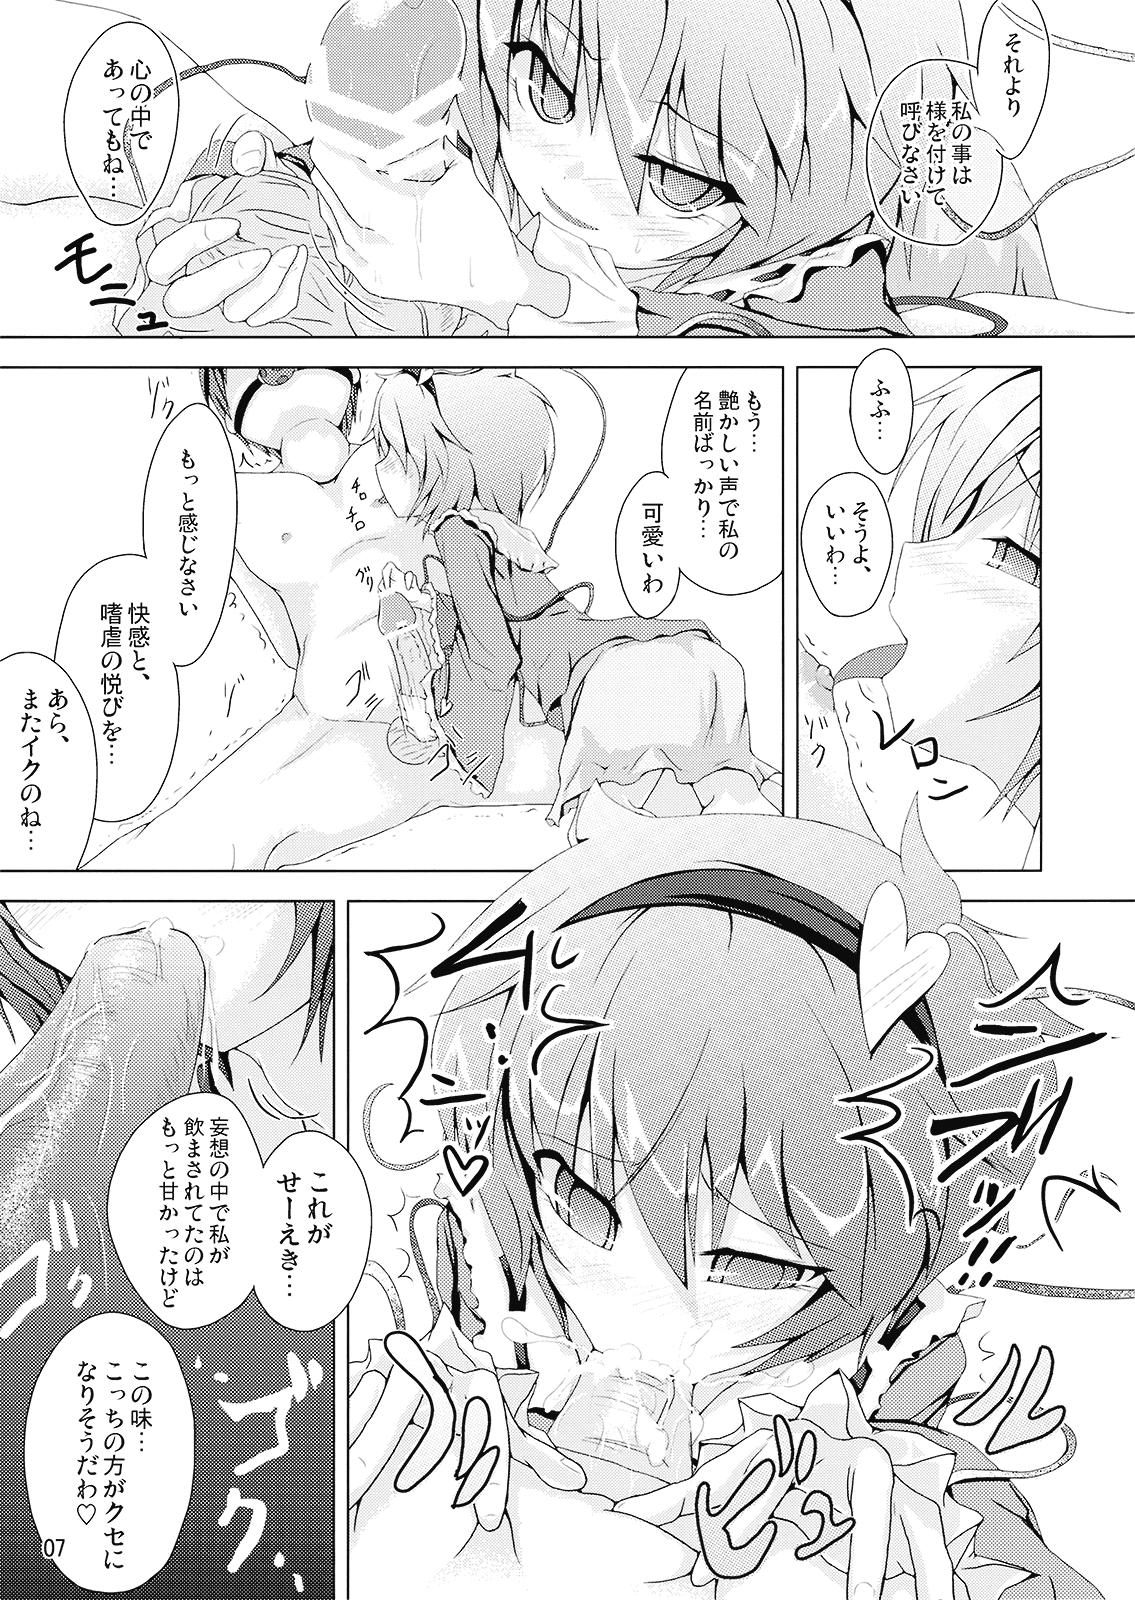 Lesbos Satorare Ijirare - Touhou project Freeteenporn - Page 7